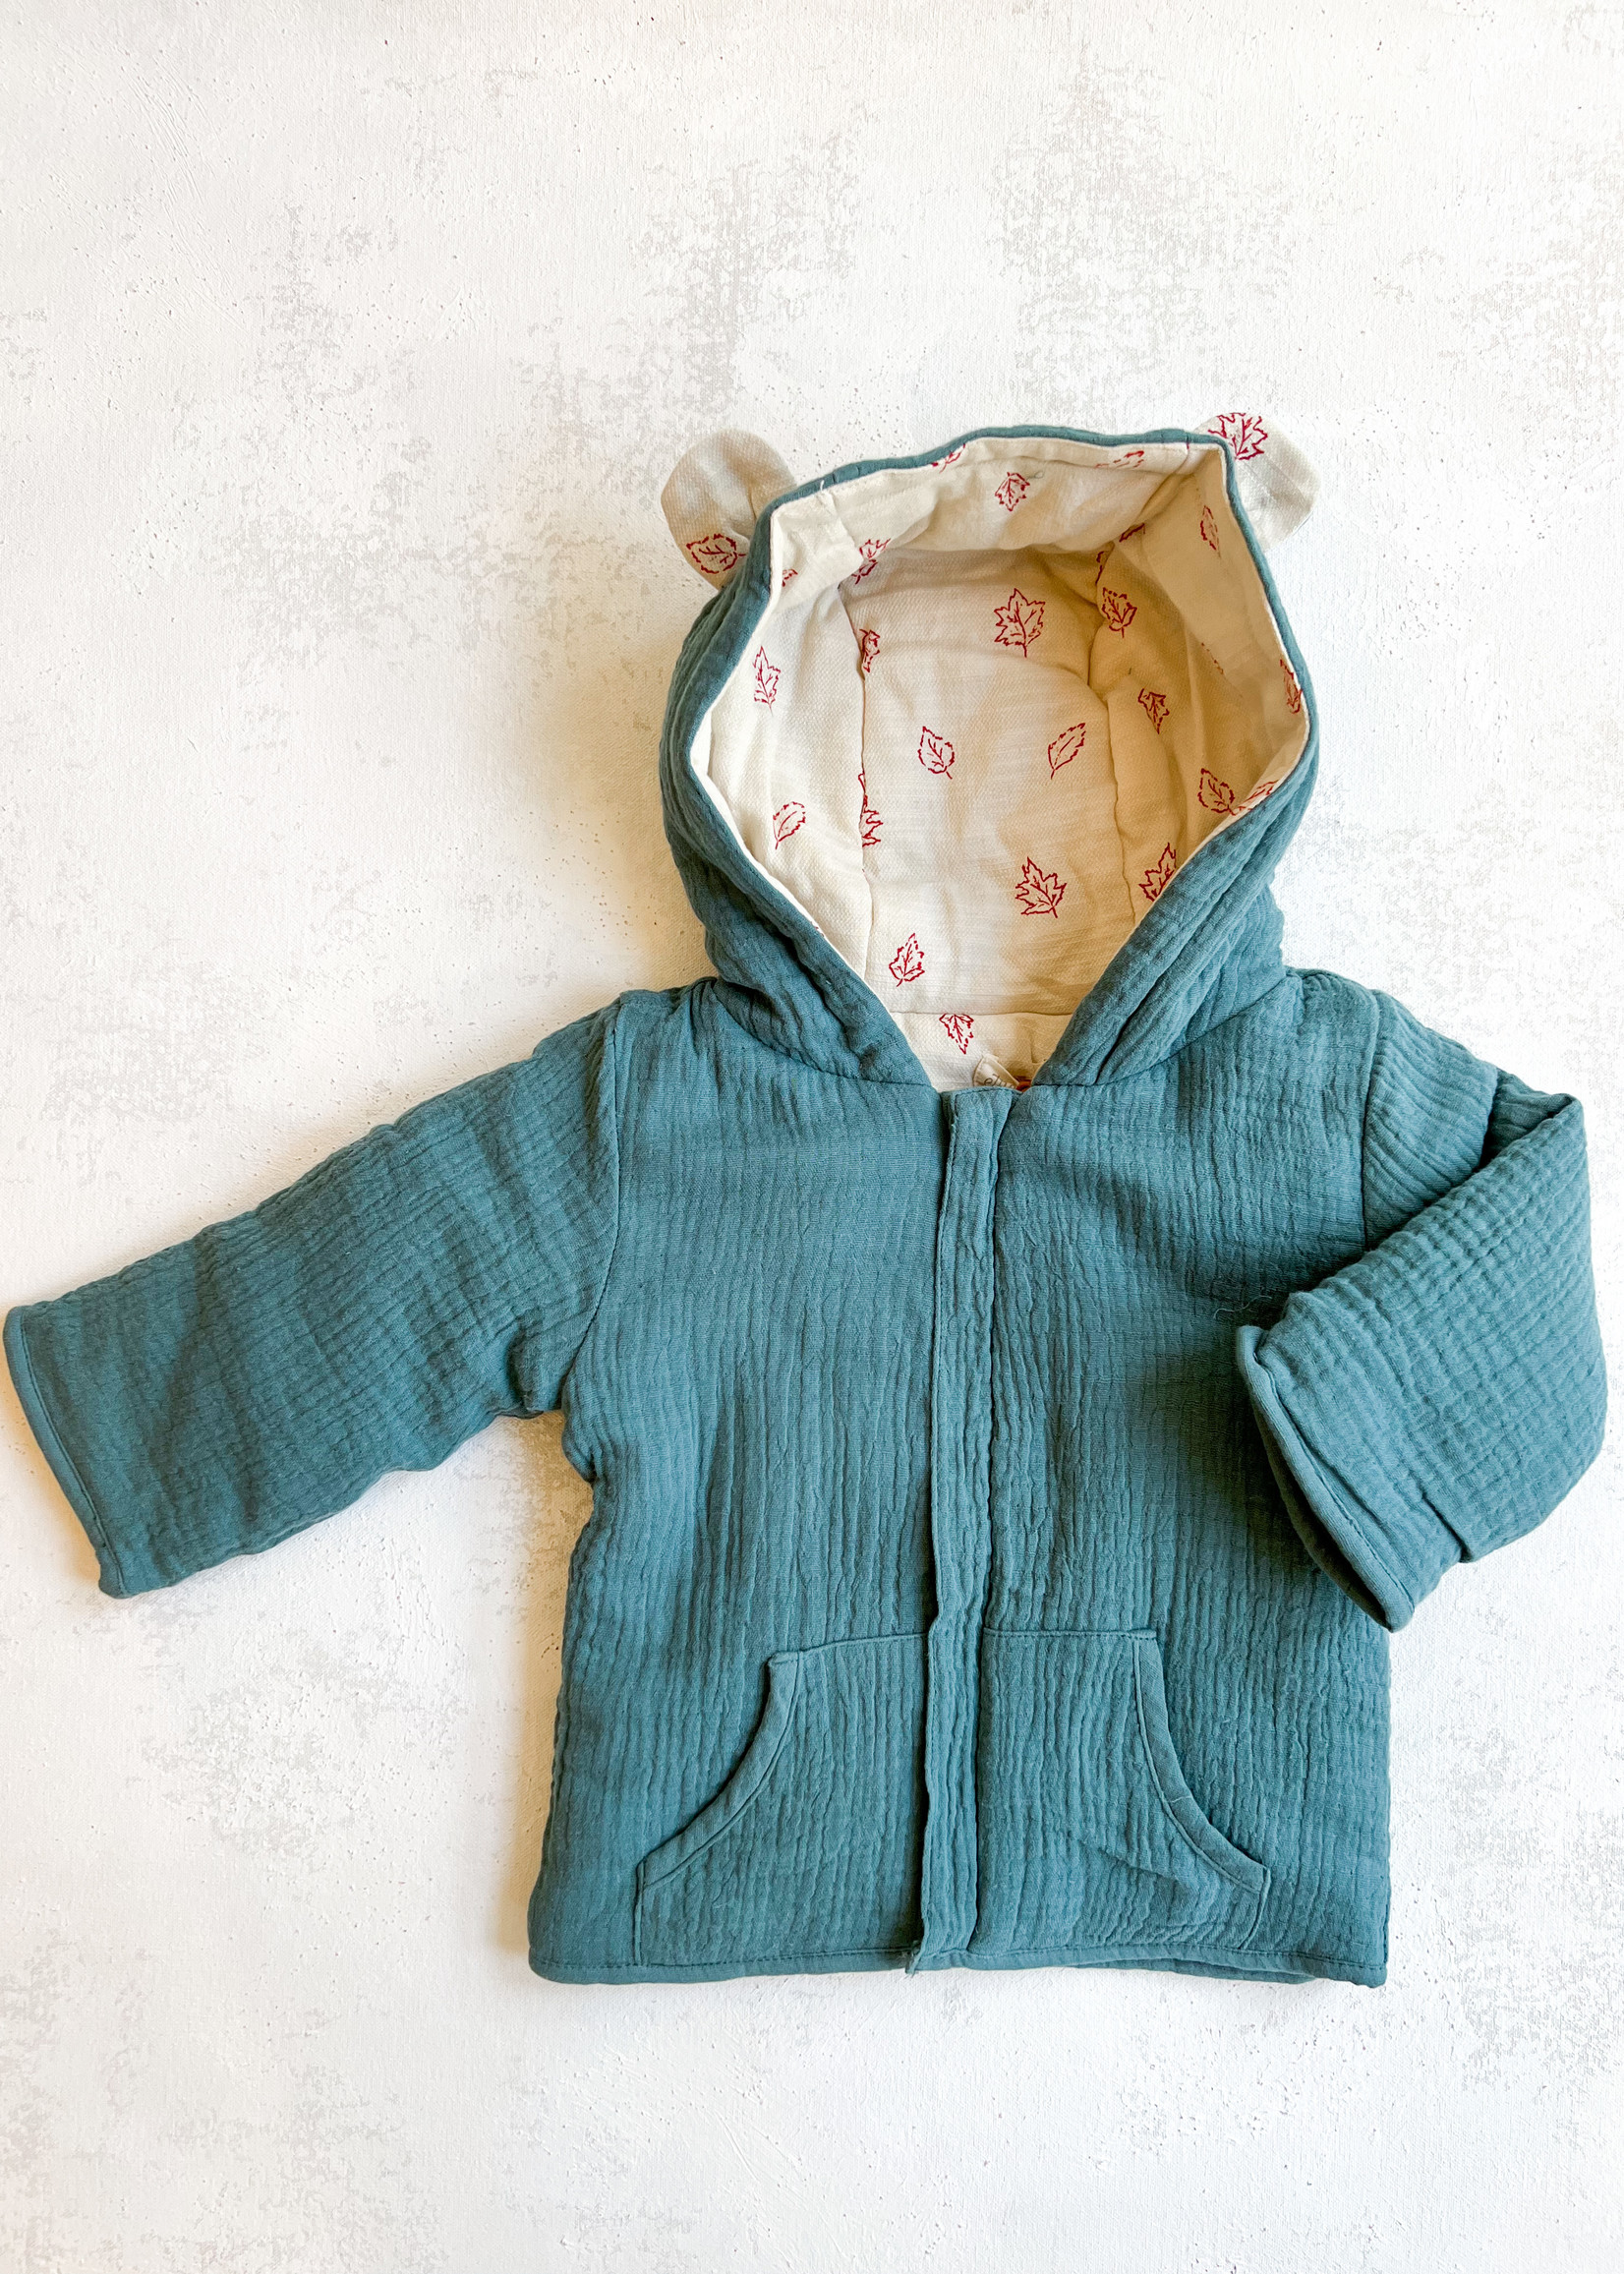 Elitaire Petite Austell Zipped Jacket in Teal Leaves